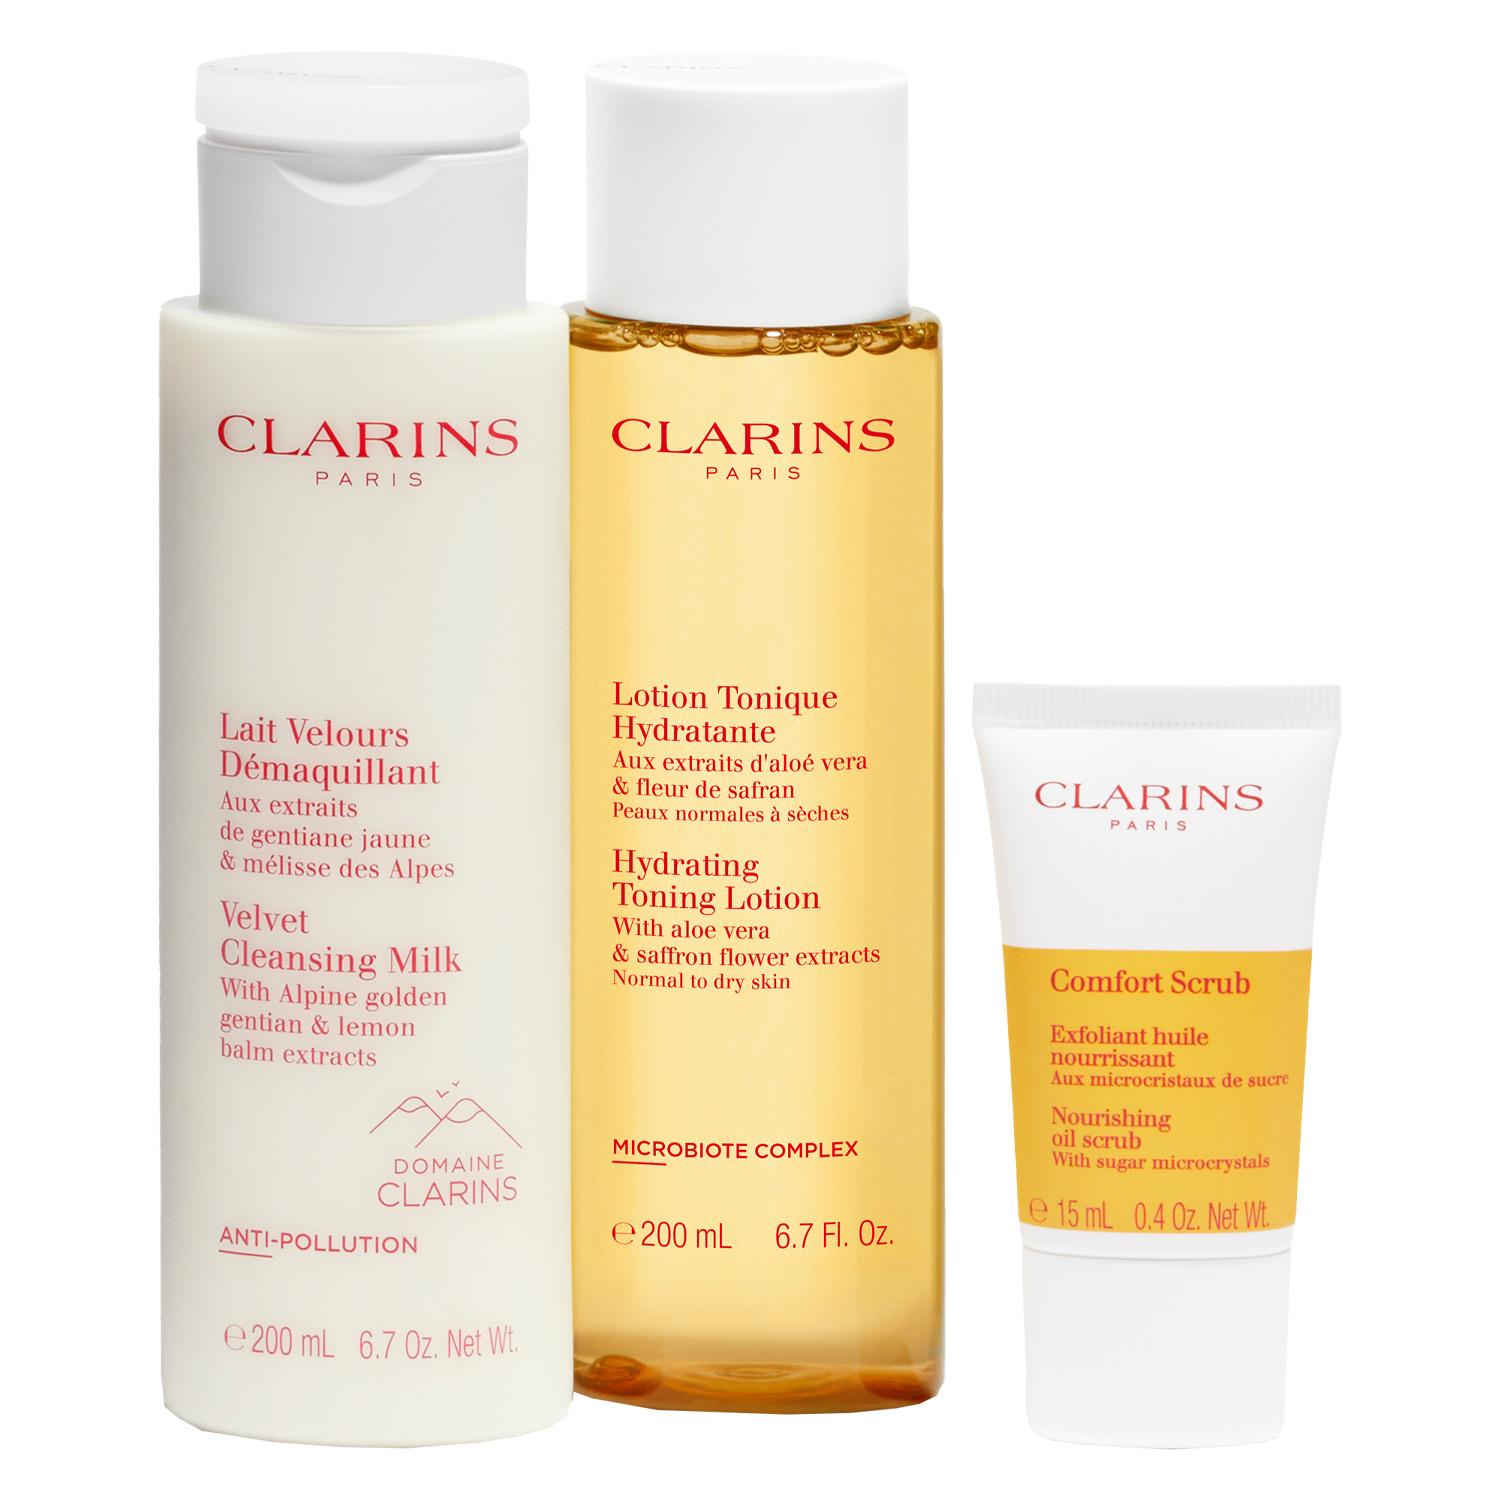 Clarins Specials - Normal Skin Cleansing Set